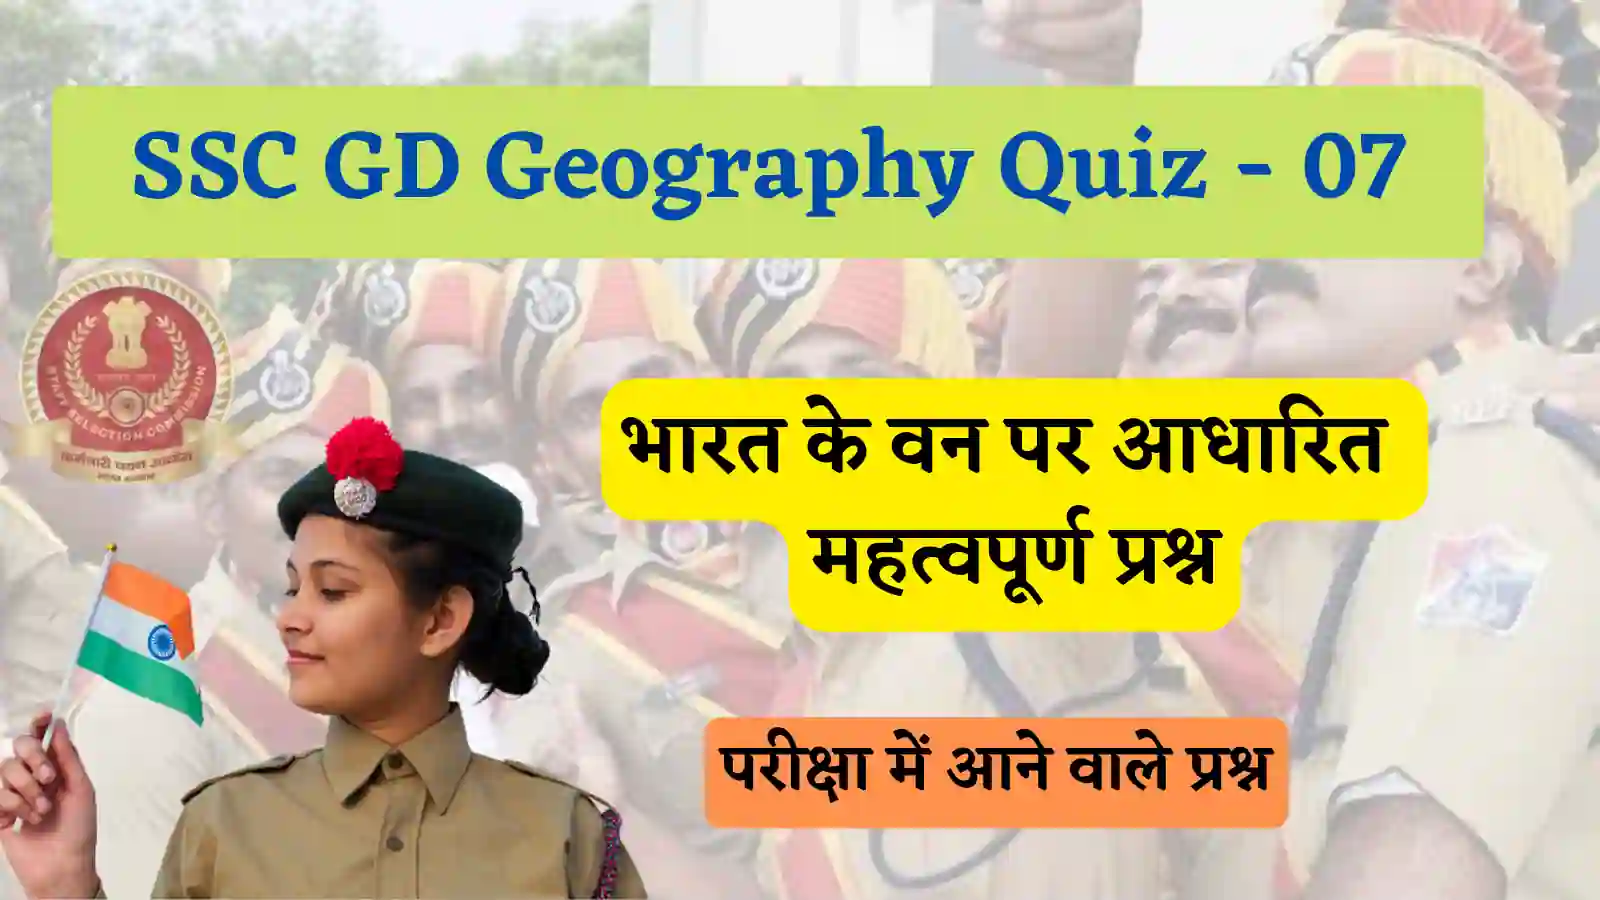 SSC GD Geography Quiz - 07